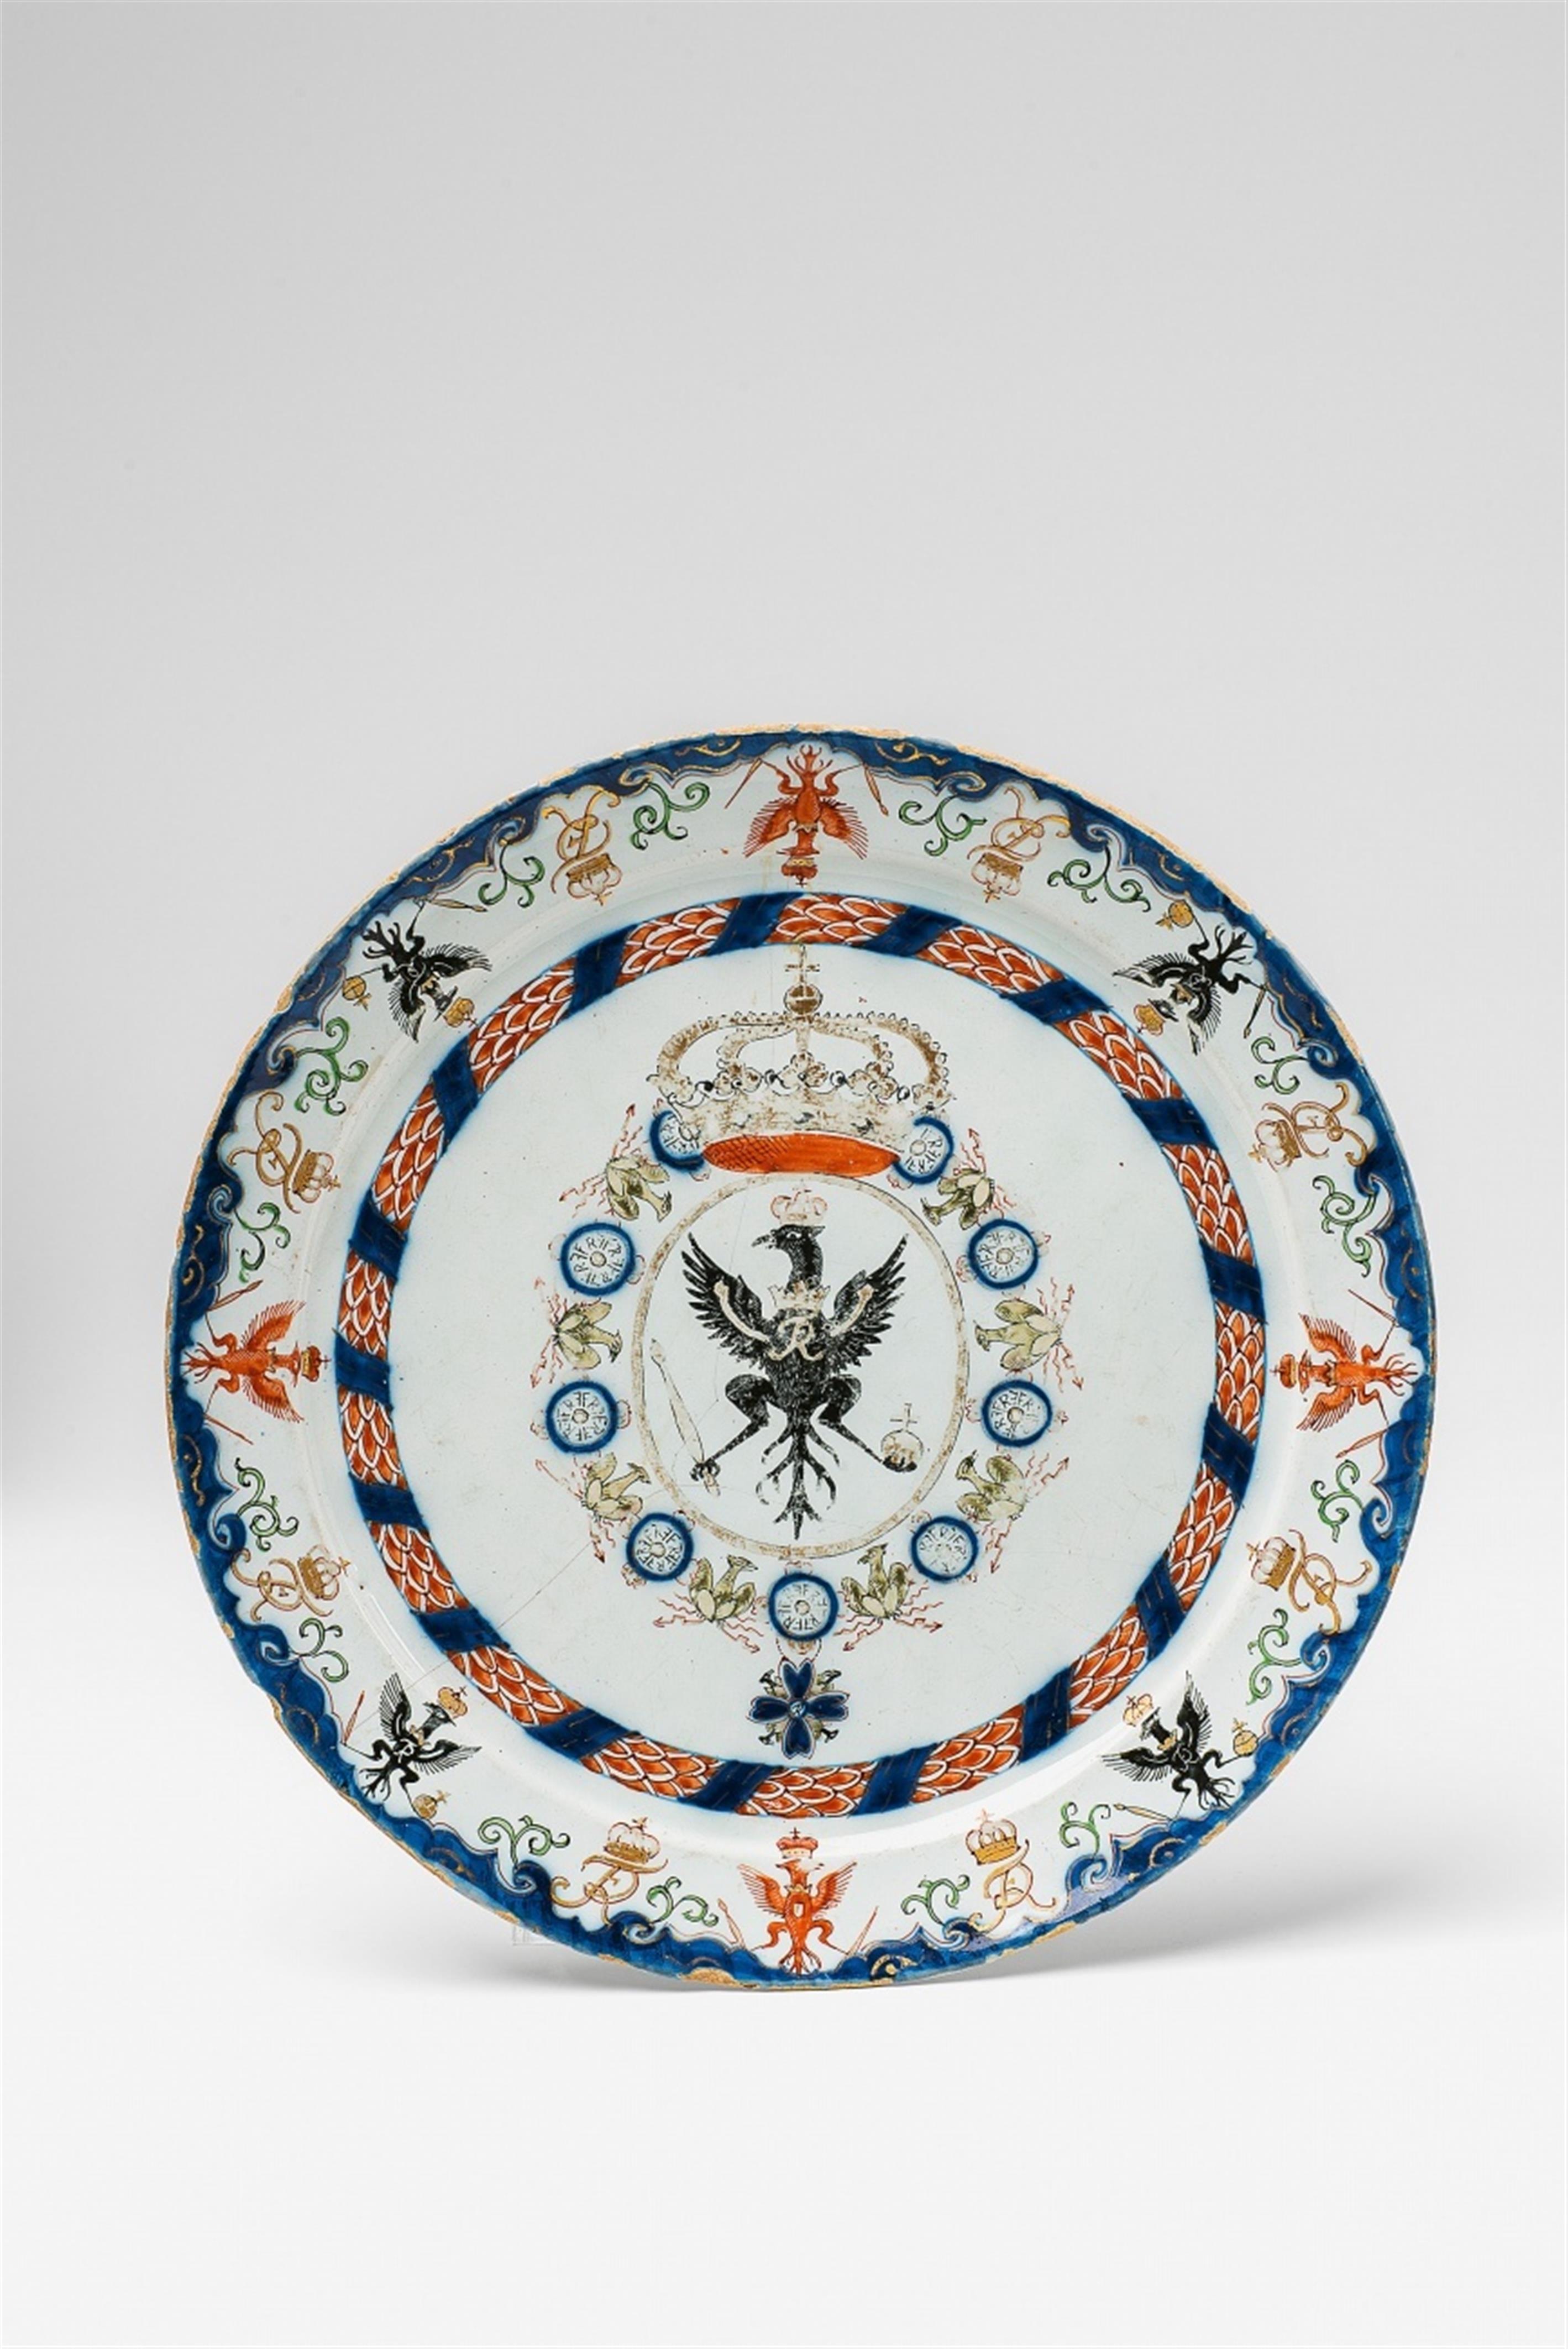 A rare faience plate from the service for the Order of the Black Eagle - image-1